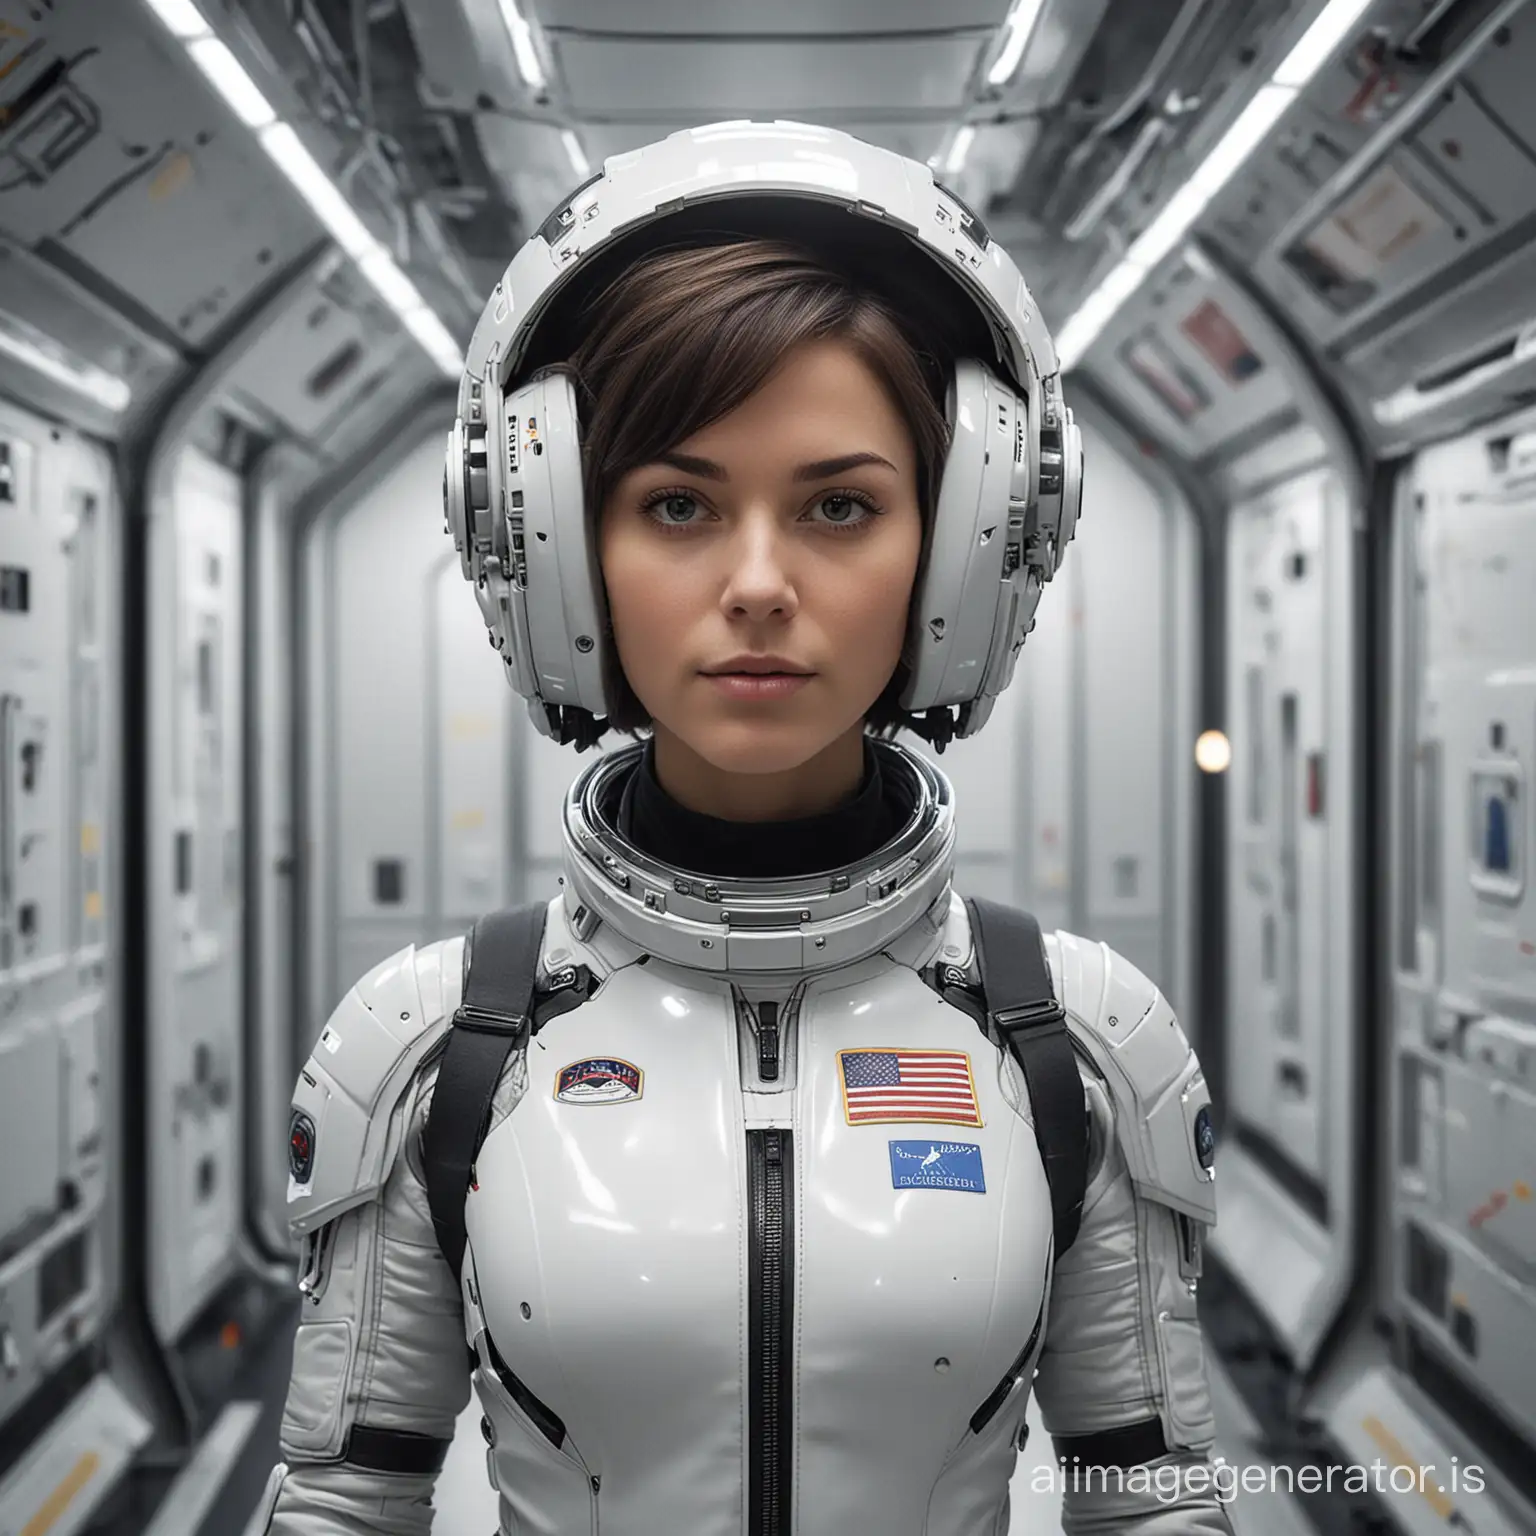 A photorealistic 3D render of a lovely short hair brunette woman in a robotic astronaute space suit with a helmet on her head standing ground level inside a space station hallway. The woman is at the center in depth of the hallway, we can see her bionic boots. She appears to be looking straight ahead. The space station is white with various machinery, equipment and an a closed door visible in the background. The woman's face is visible and she looks to be in her late twenties. The helmet has a visor on the left side. The image has a color palette of white, gray, and black. The overall atmosphere is futuristic and space-themed.